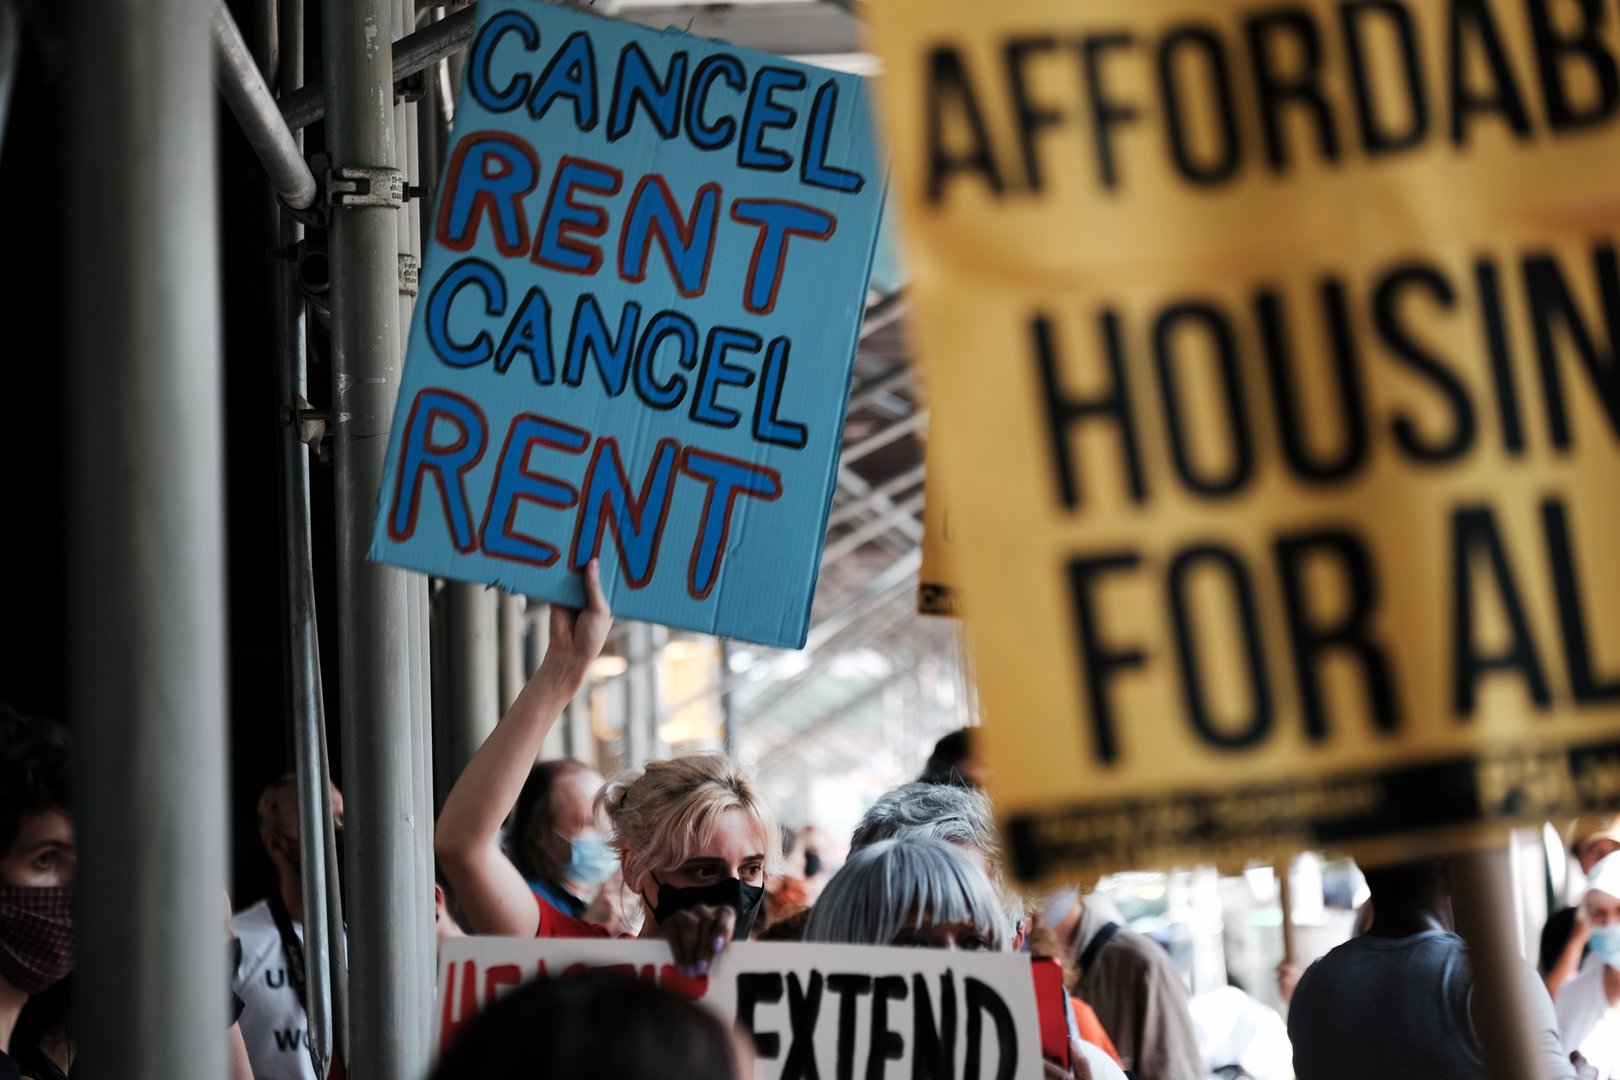 Renters will still face unfair evictions under 'inadequate' new bill, say campaigners